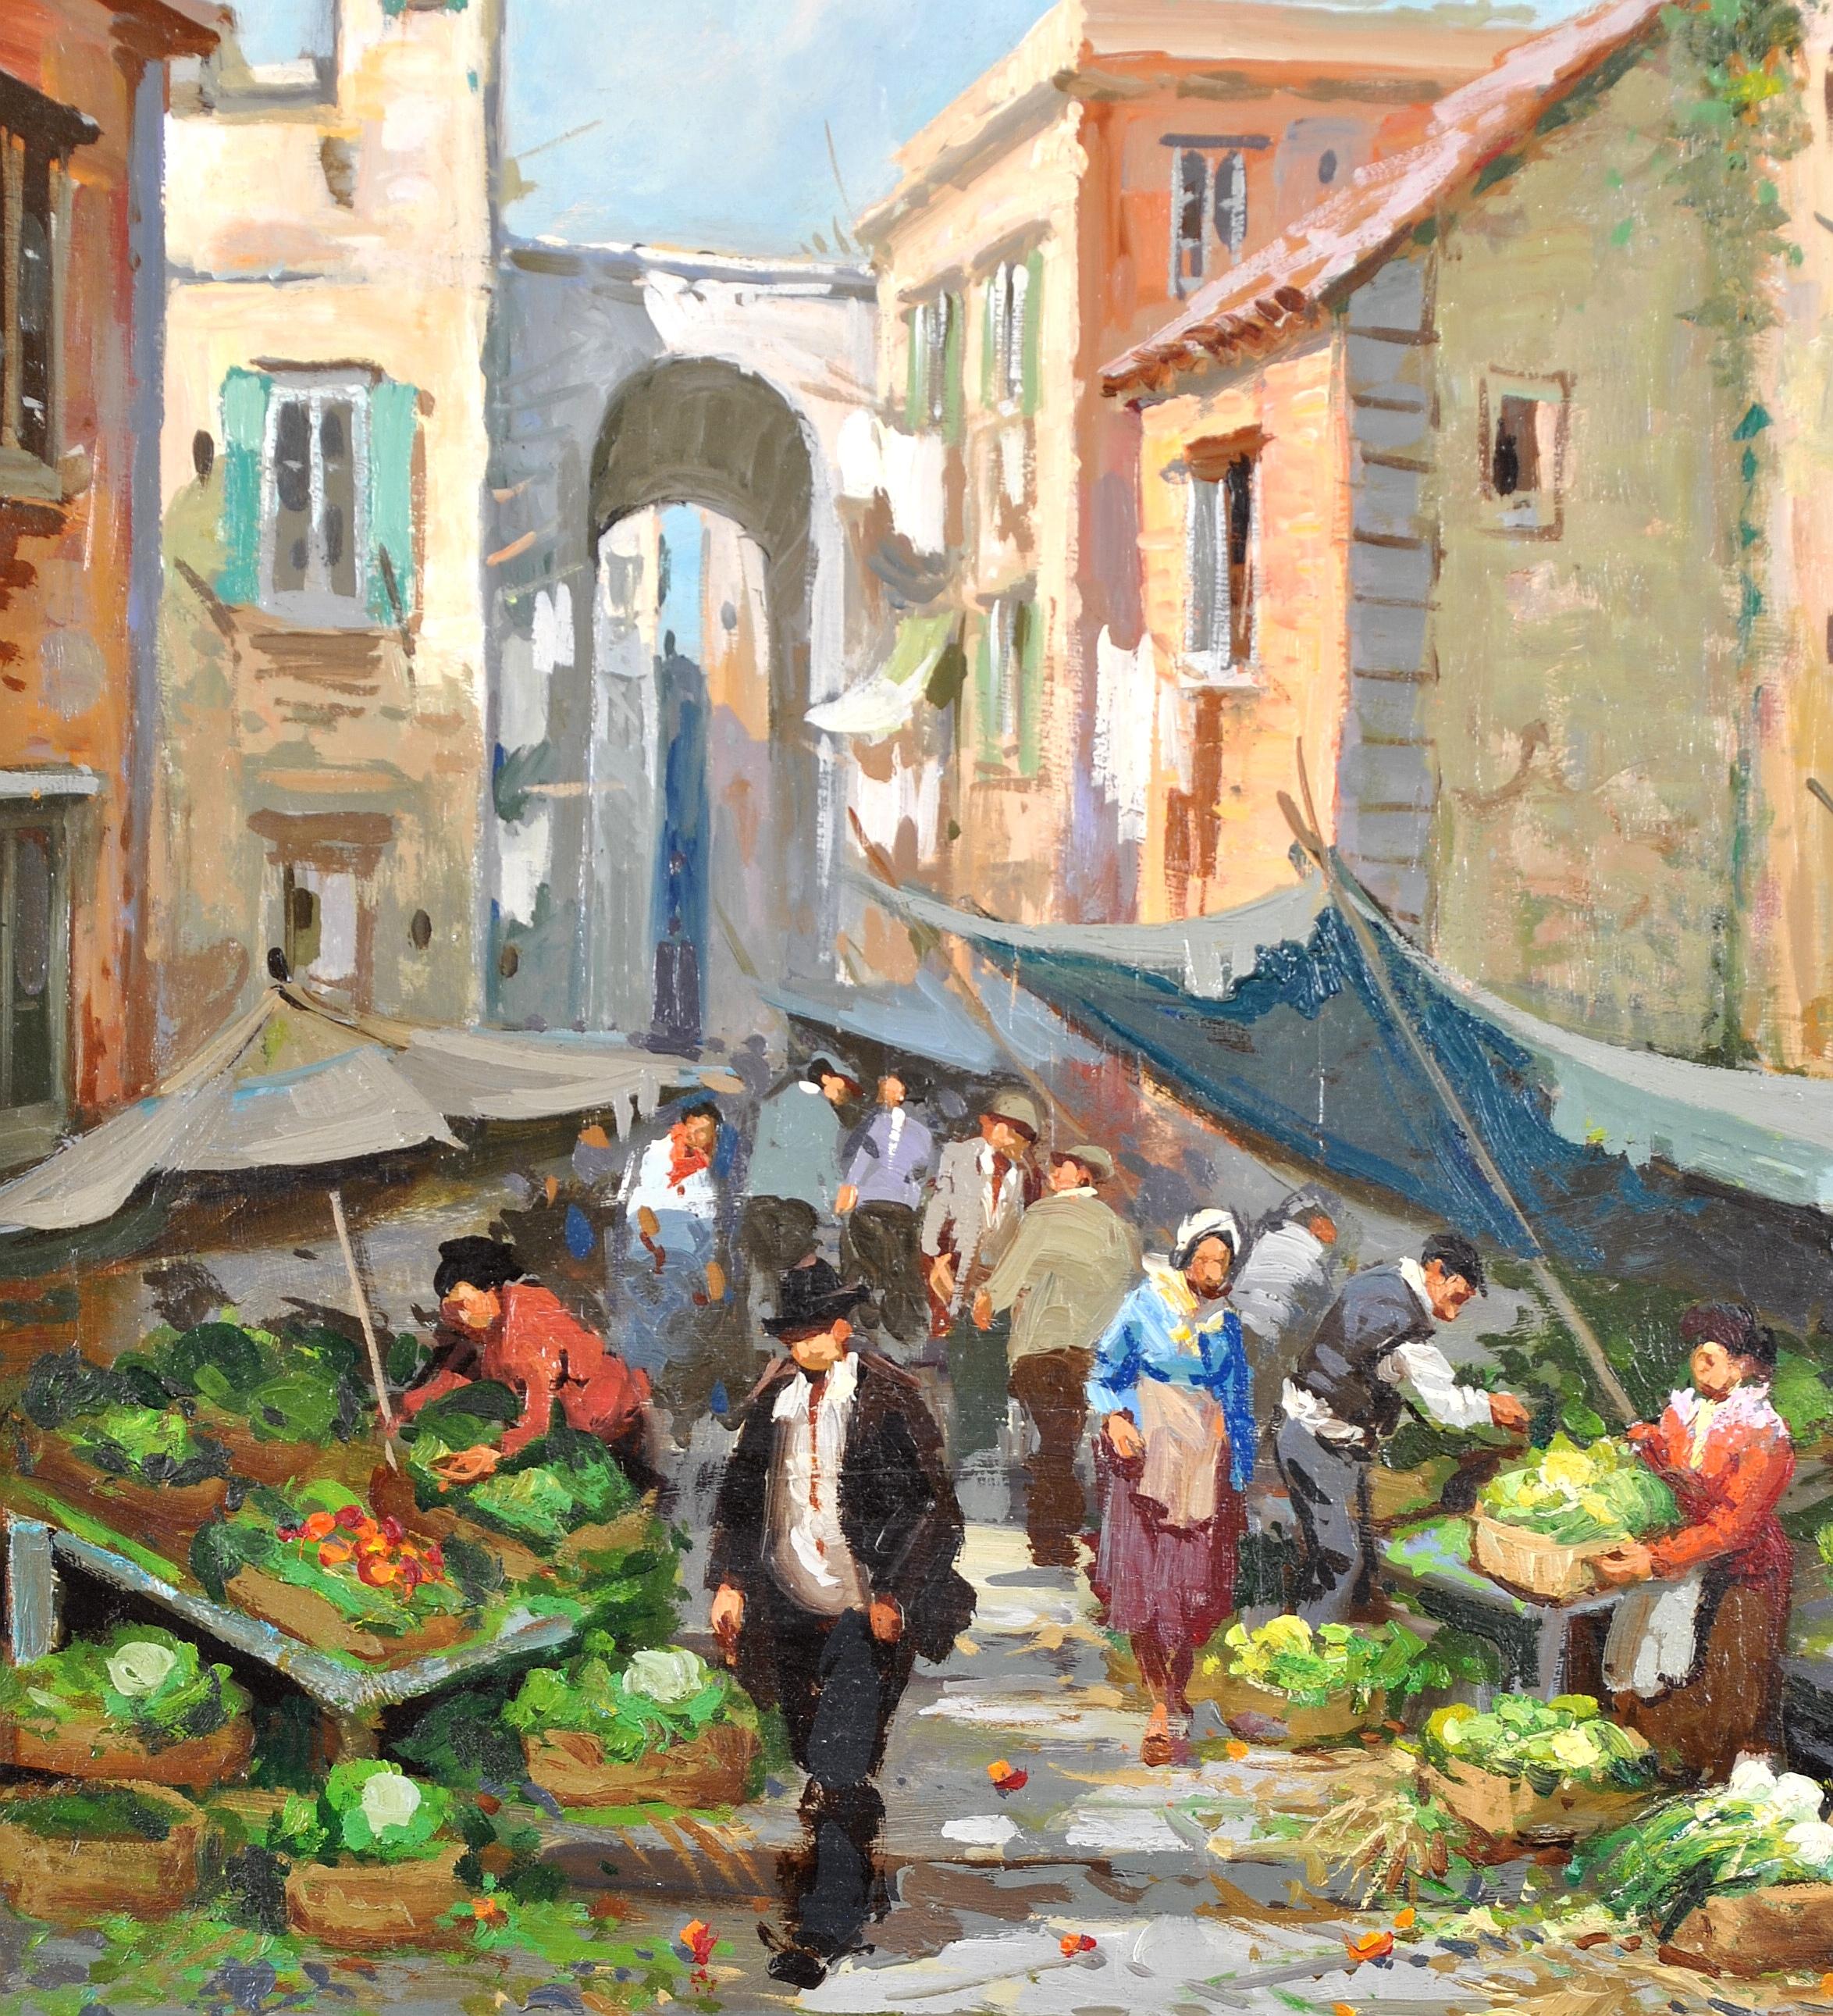 A beautiful mid 20th century Italian oil on board depicting market day in an old town. Superbly painted work with lovely impasto brushwork. Indistinctly signed lower left and presented in a gold frame.

Artist: Italian School, mid 20th